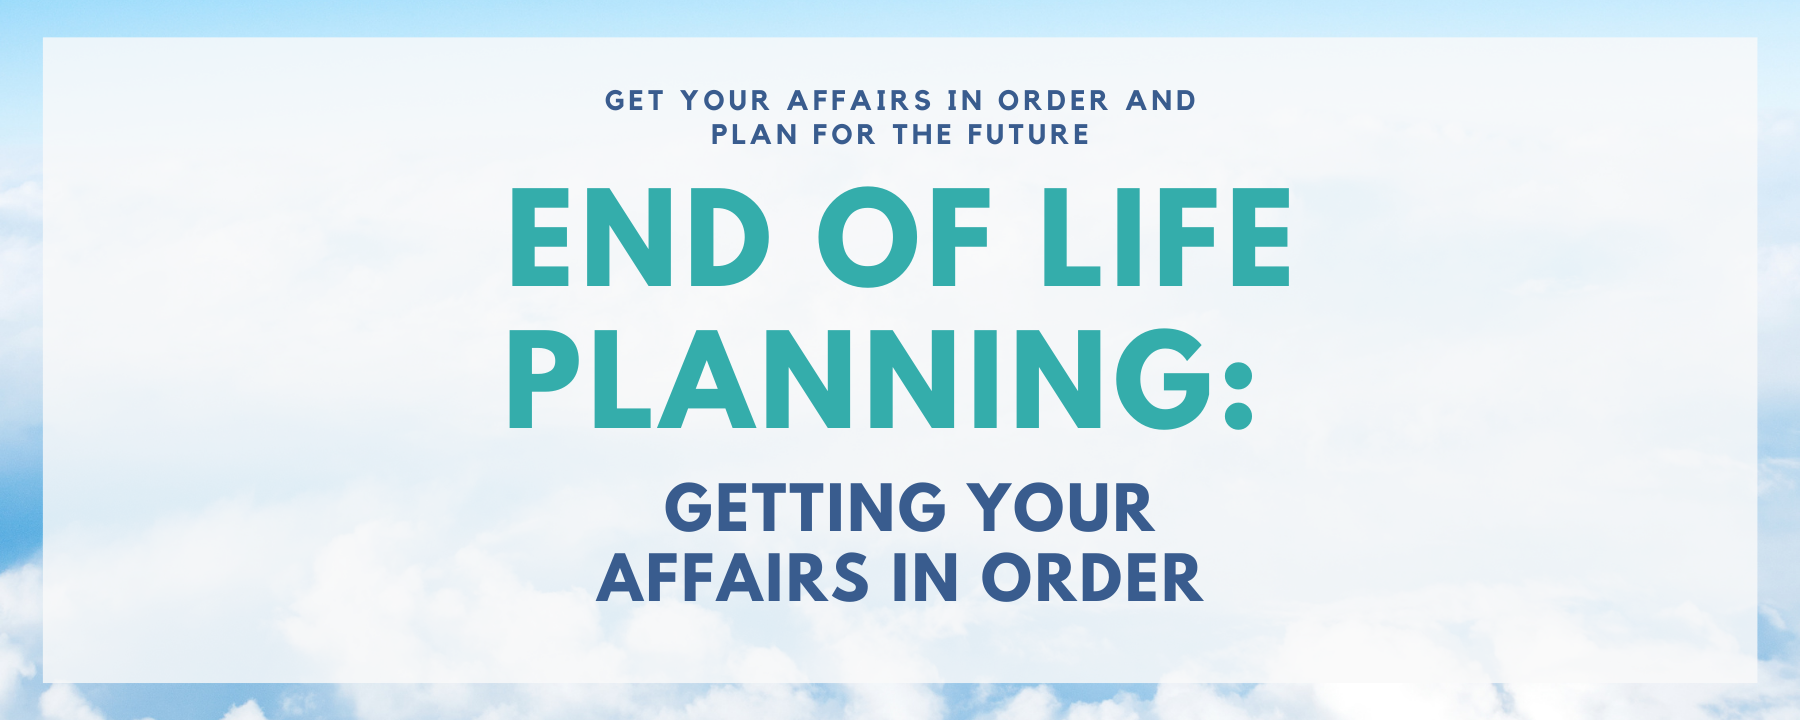 End of Life Planning: Getting Your Affairs in Order